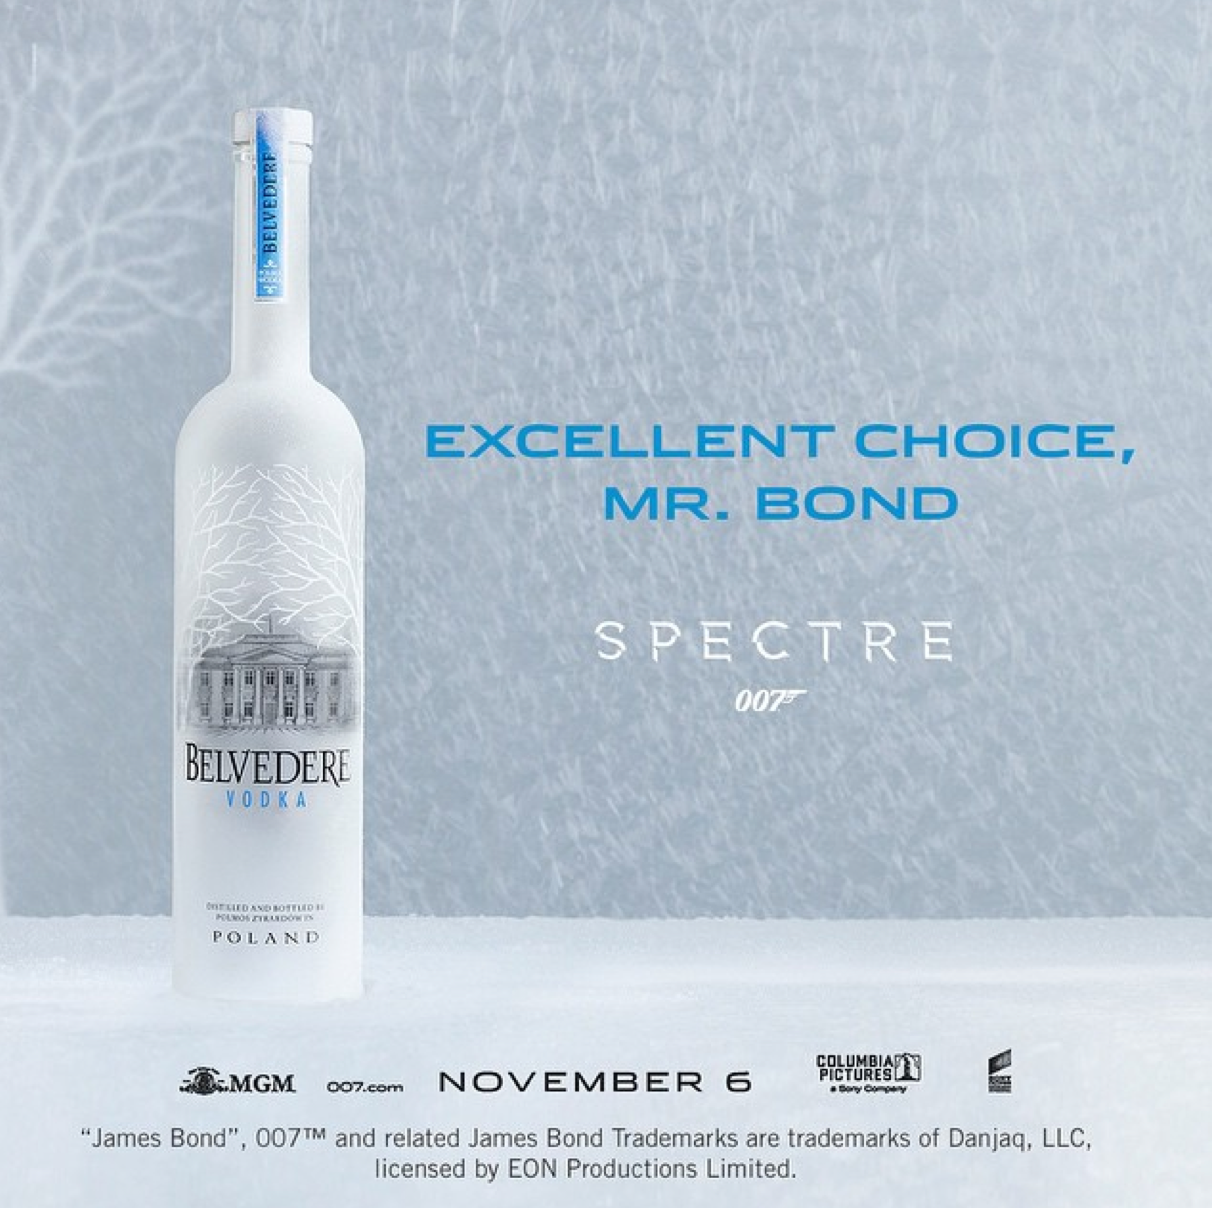 Belvedere 007 SPECTRE Limited Edition